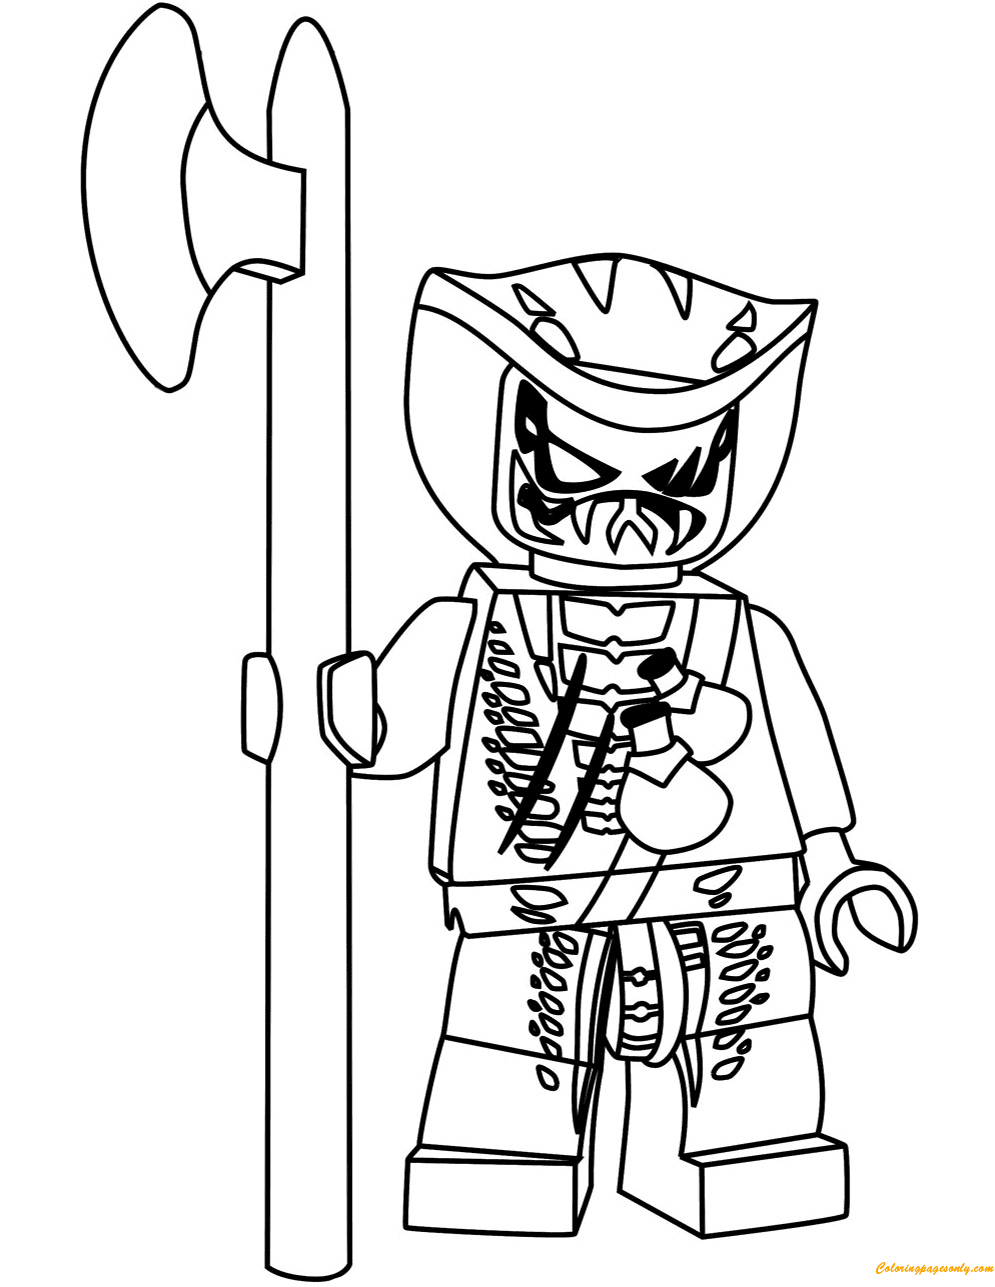 Lego Coloring Pages   Coloring Pages For Kids And Adults